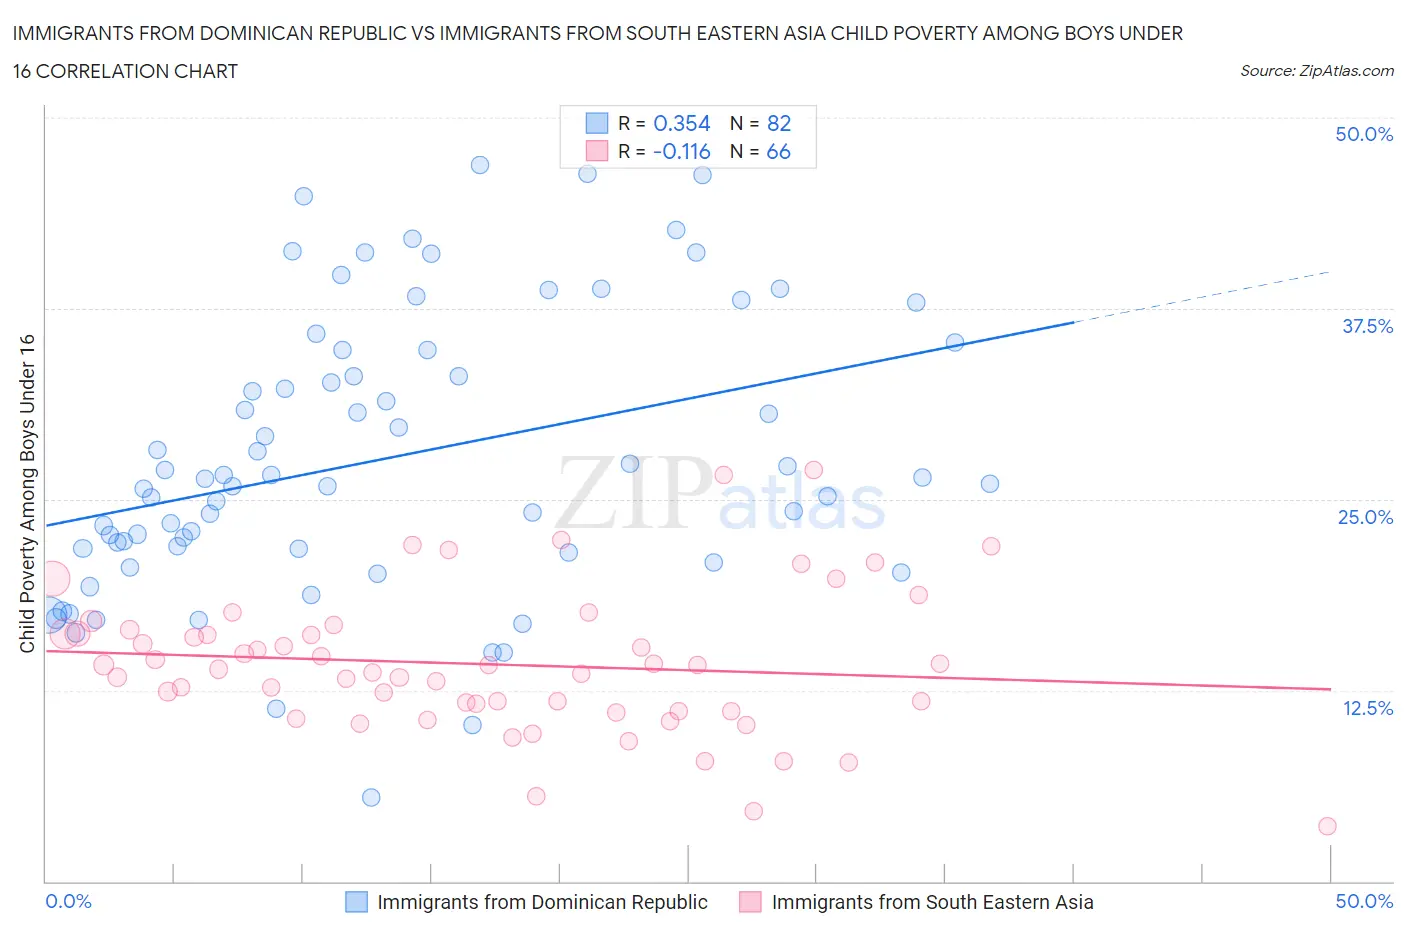 Immigrants from Dominican Republic vs Immigrants from South Eastern Asia Child Poverty Among Boys Under 16